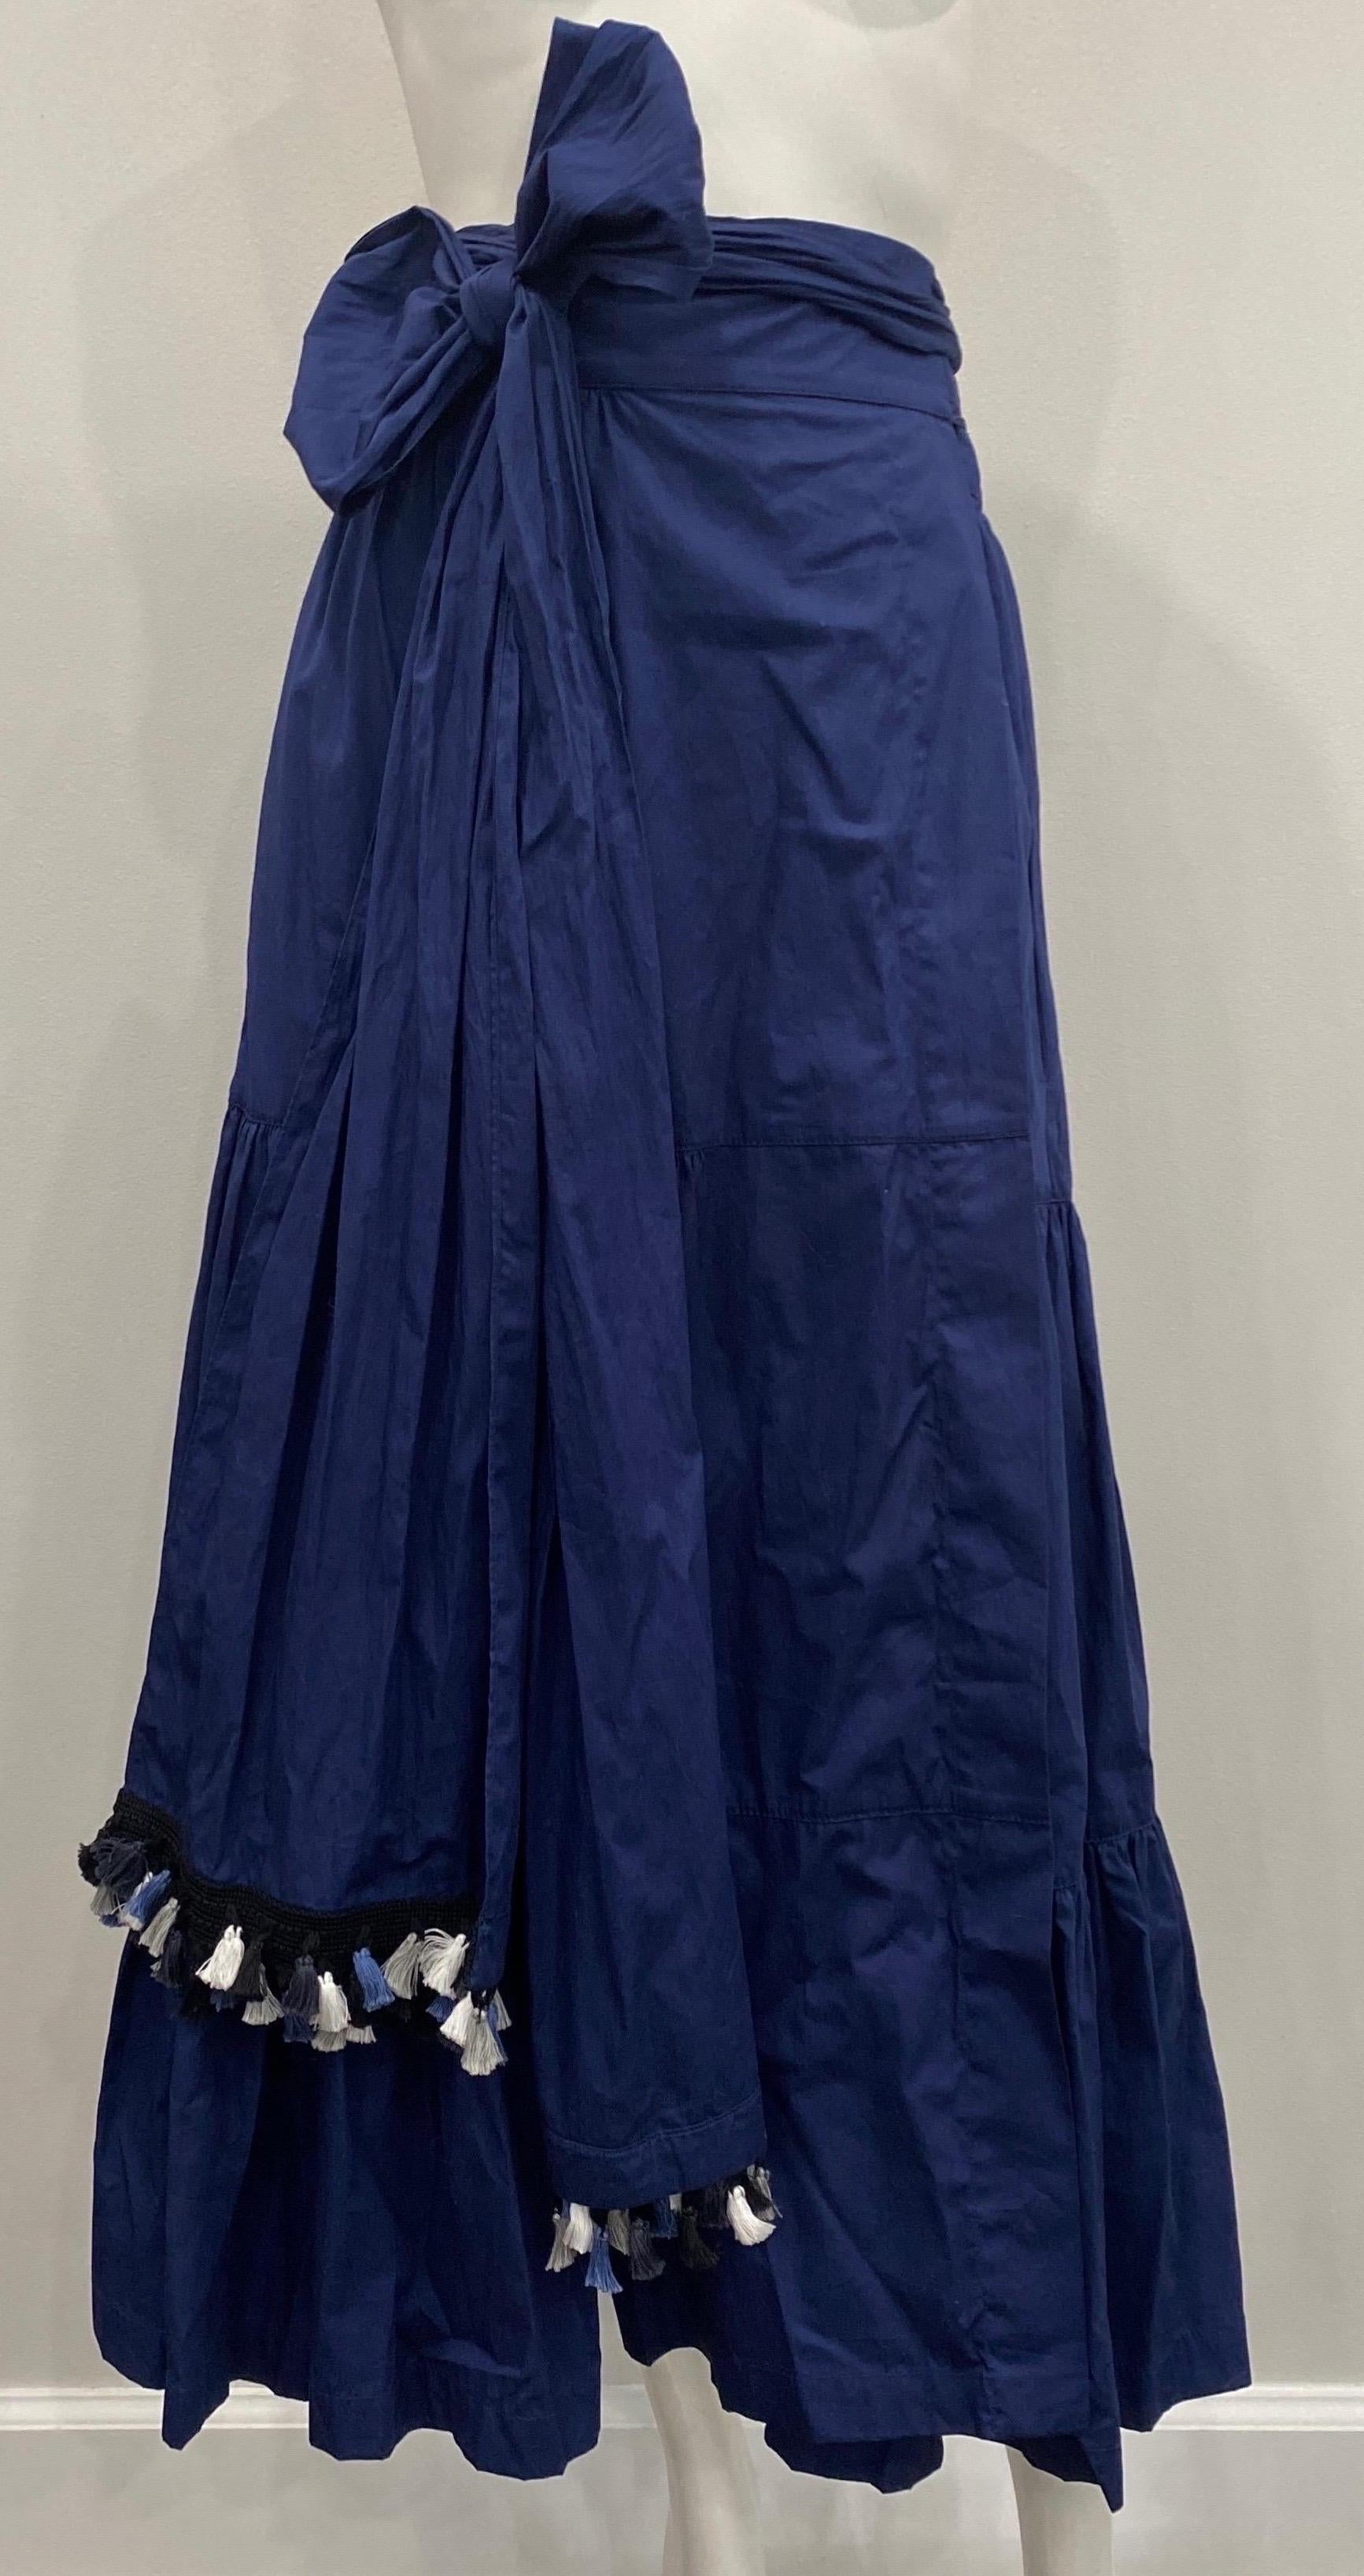 Silvia Tcherassi Michaela Navy Wrap Skirt -Size Medium In Excellent Condition For Sale In West Palm Beach, FL